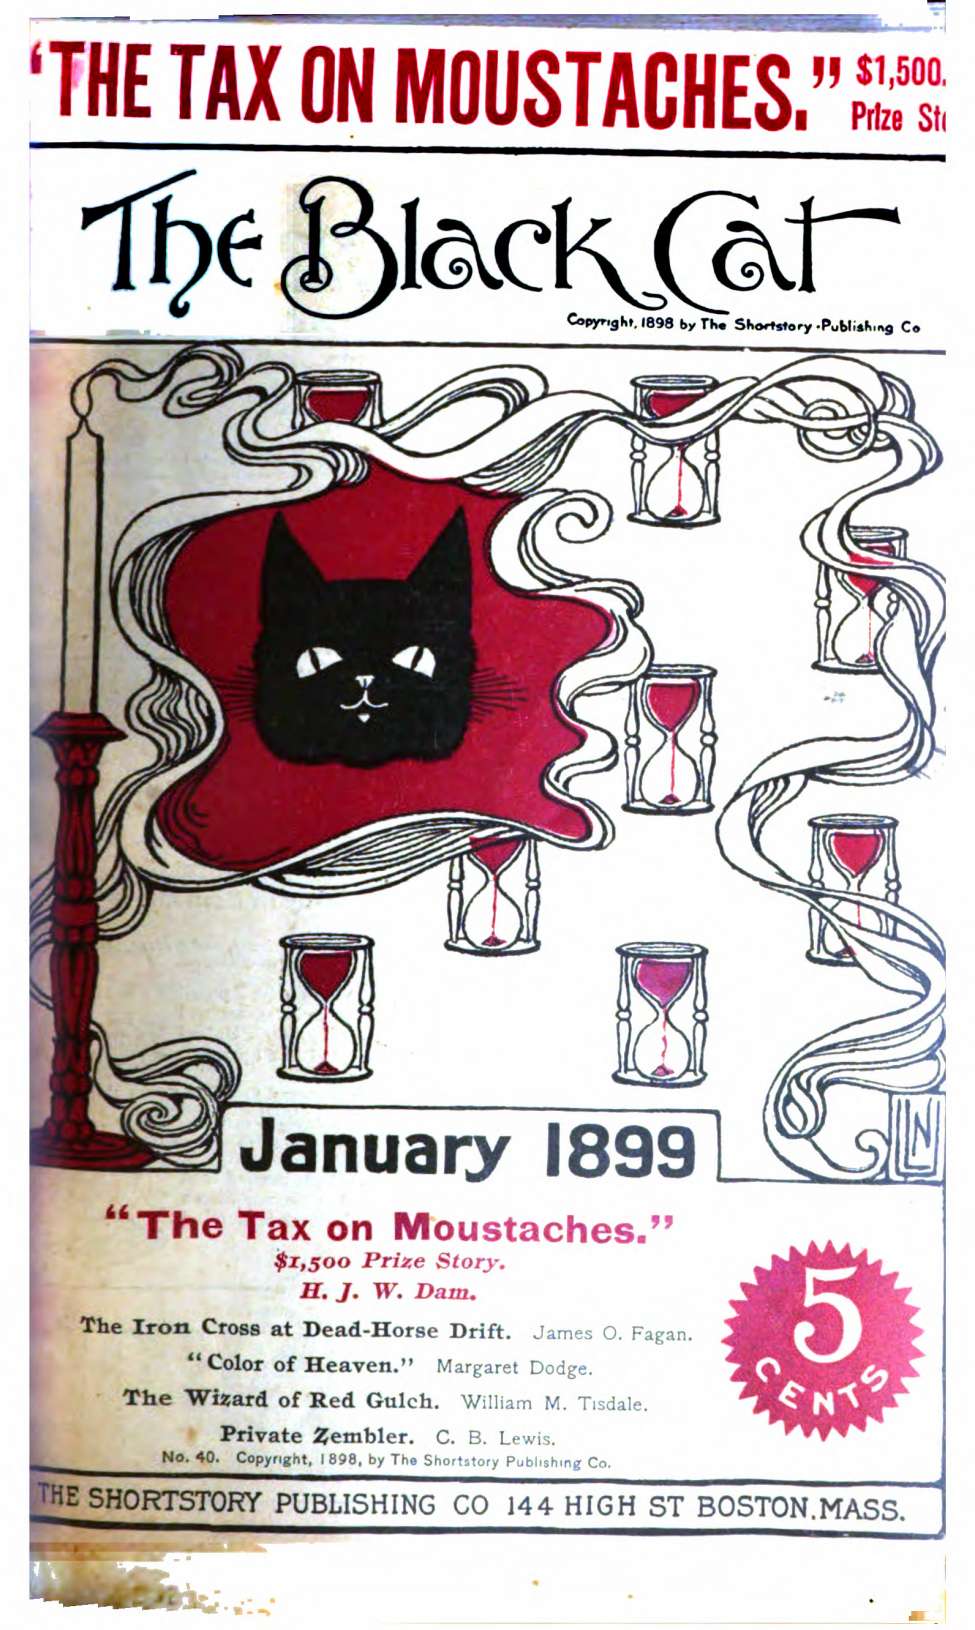 Comic Book Cover For The Black Cat v4 4 - The Tax on Moustaches - H. J. W. Dam